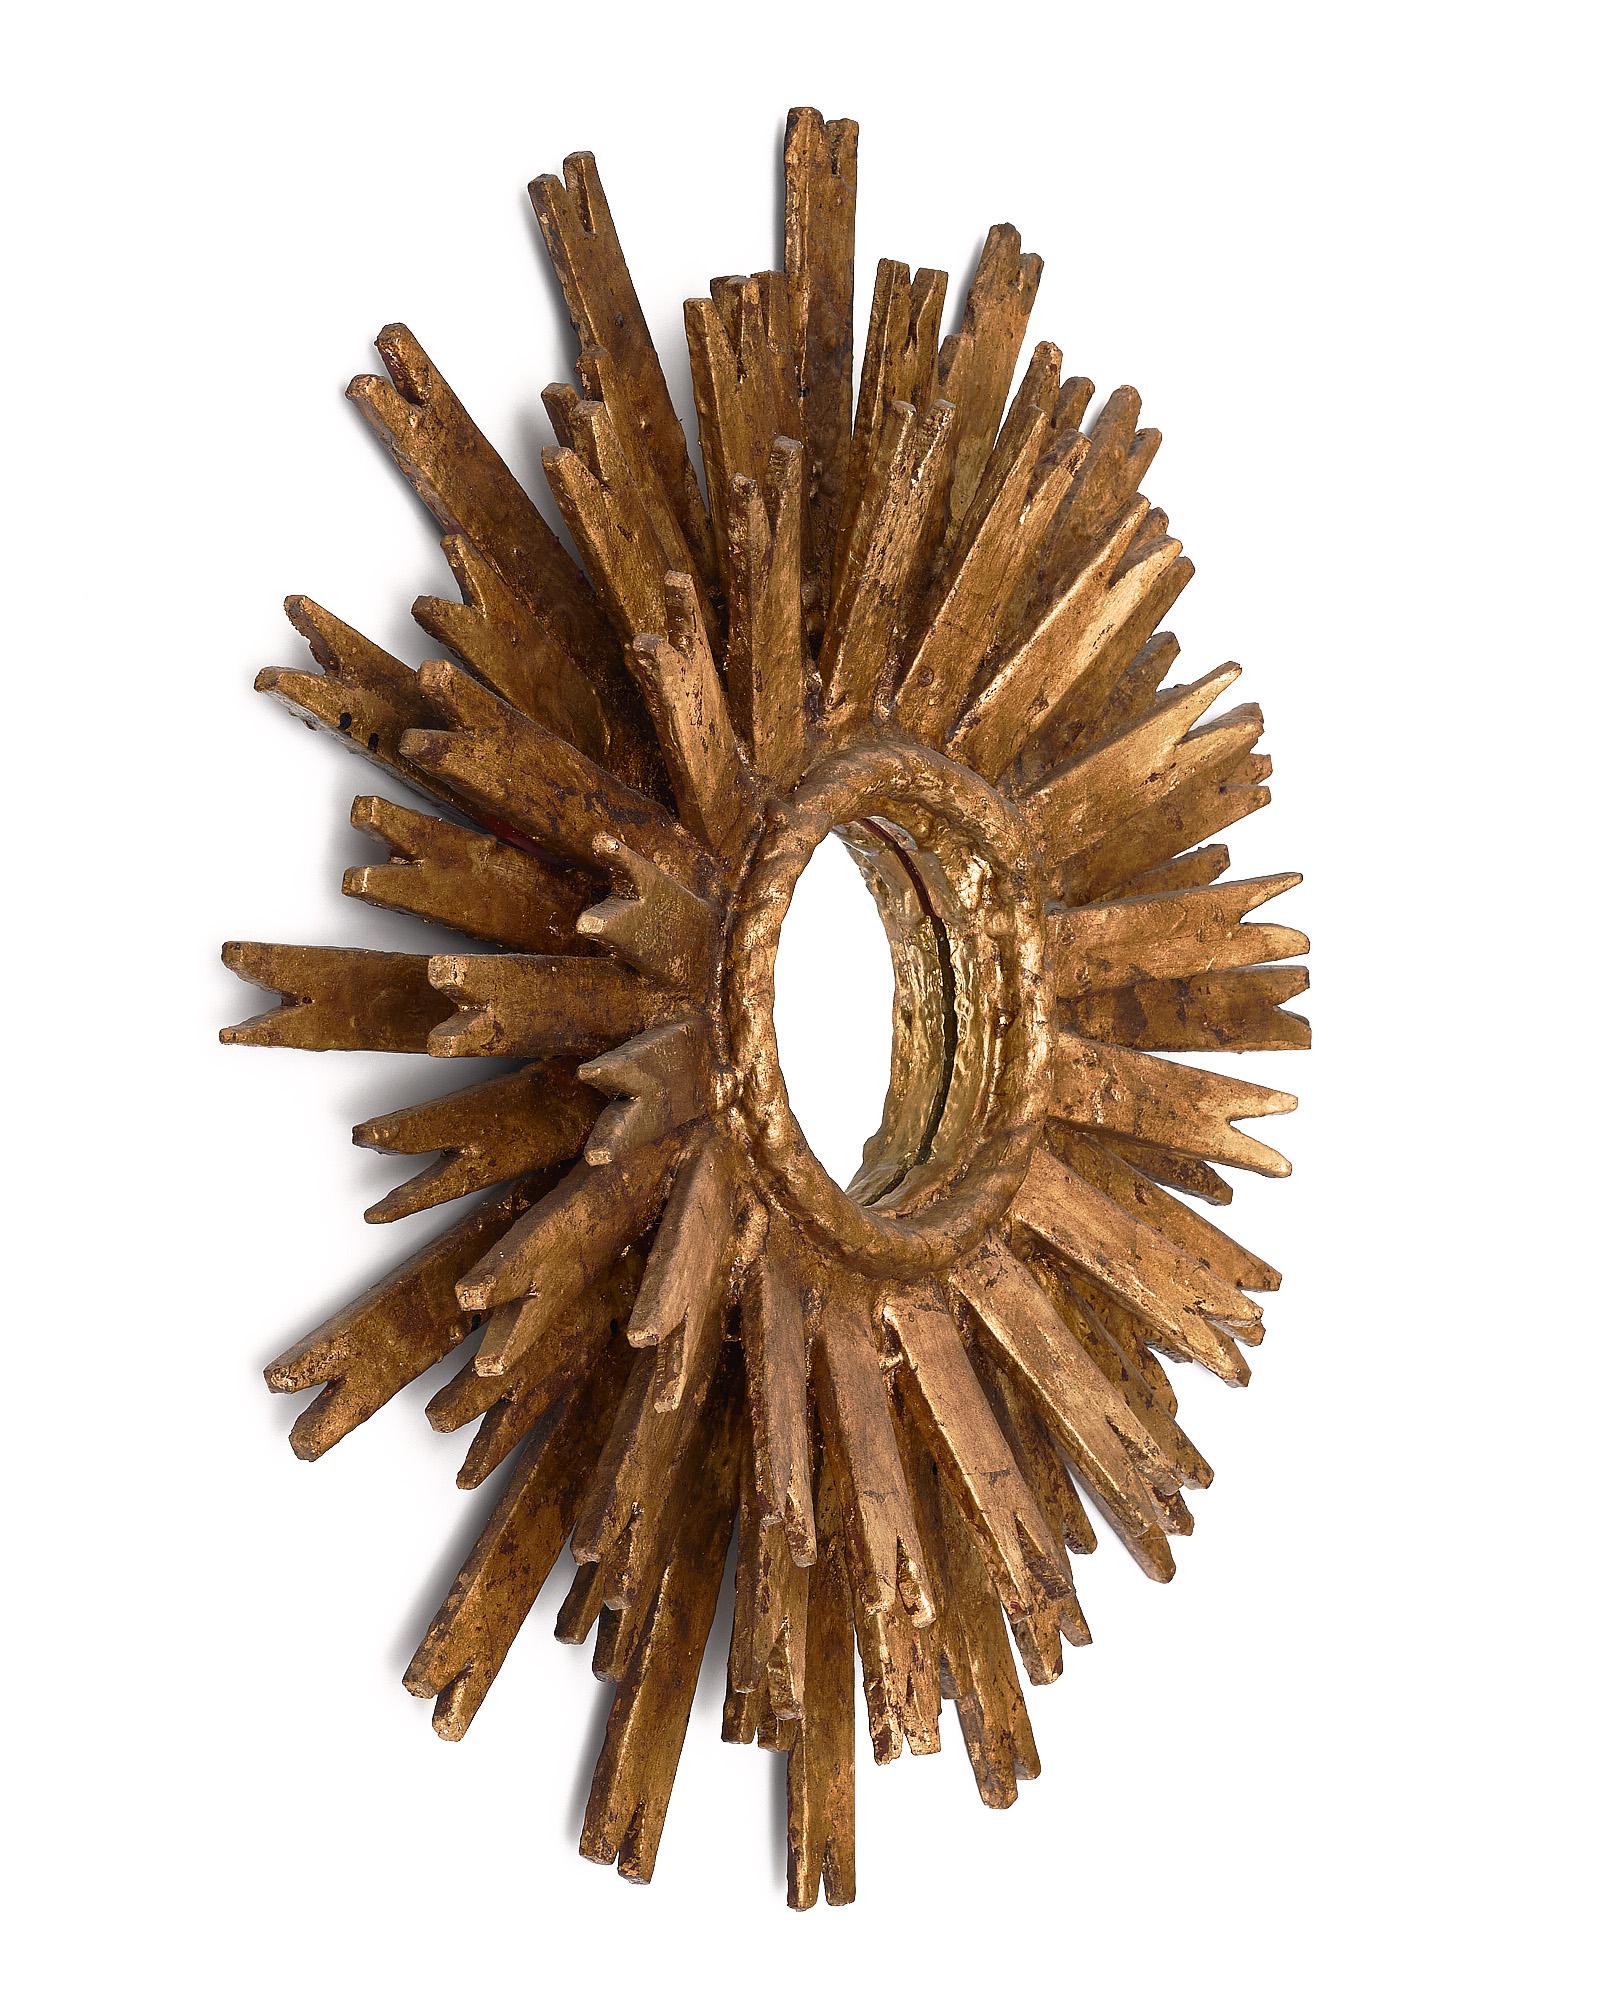 Pair of Spanish sunburst mirrors made of hand-crafted gold leafed wood.
